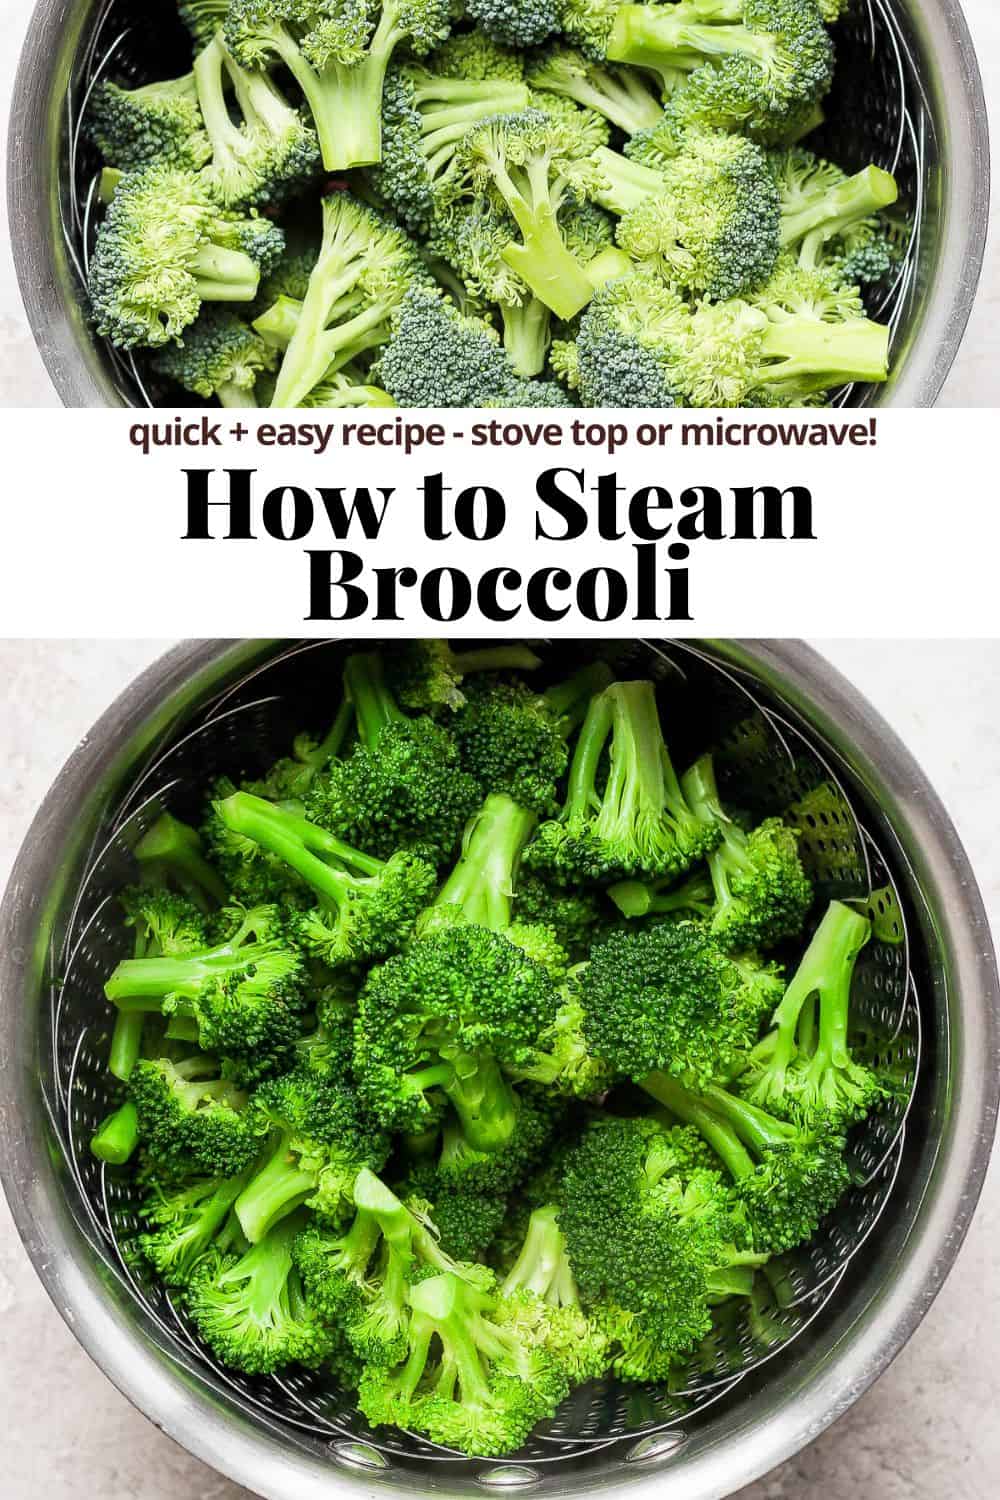 Pinterest image for how to steam broccoli.